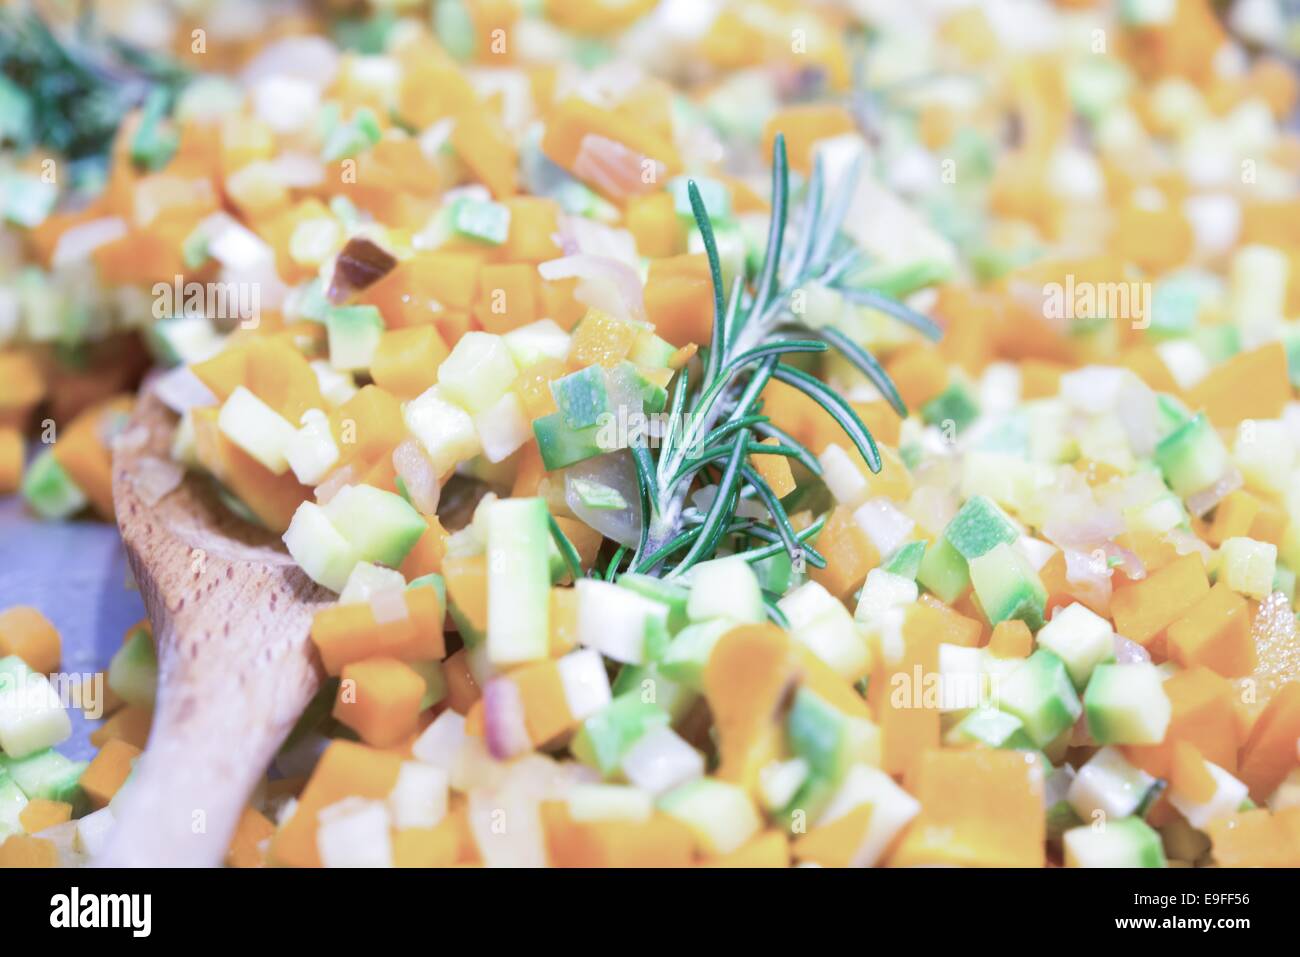 Chopped vegetables Stock Photo